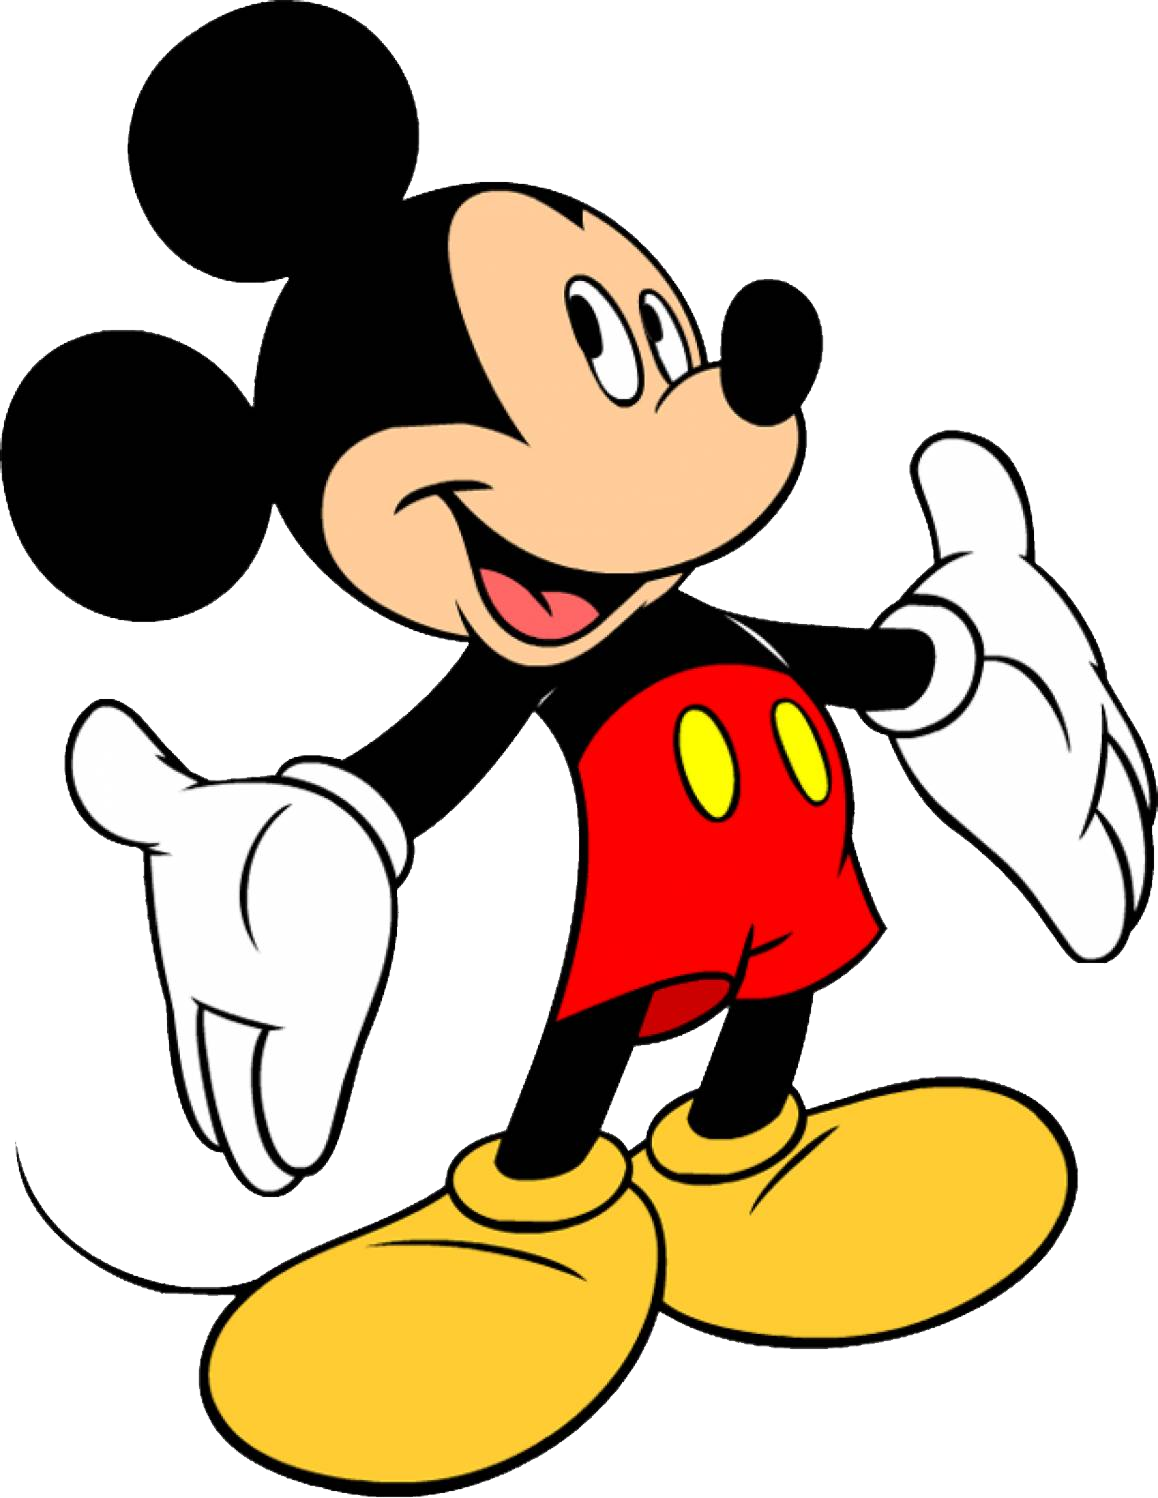 Mickey Mouse Happy PNG Image - PurePNG | Free transparent CC0 PNG Image